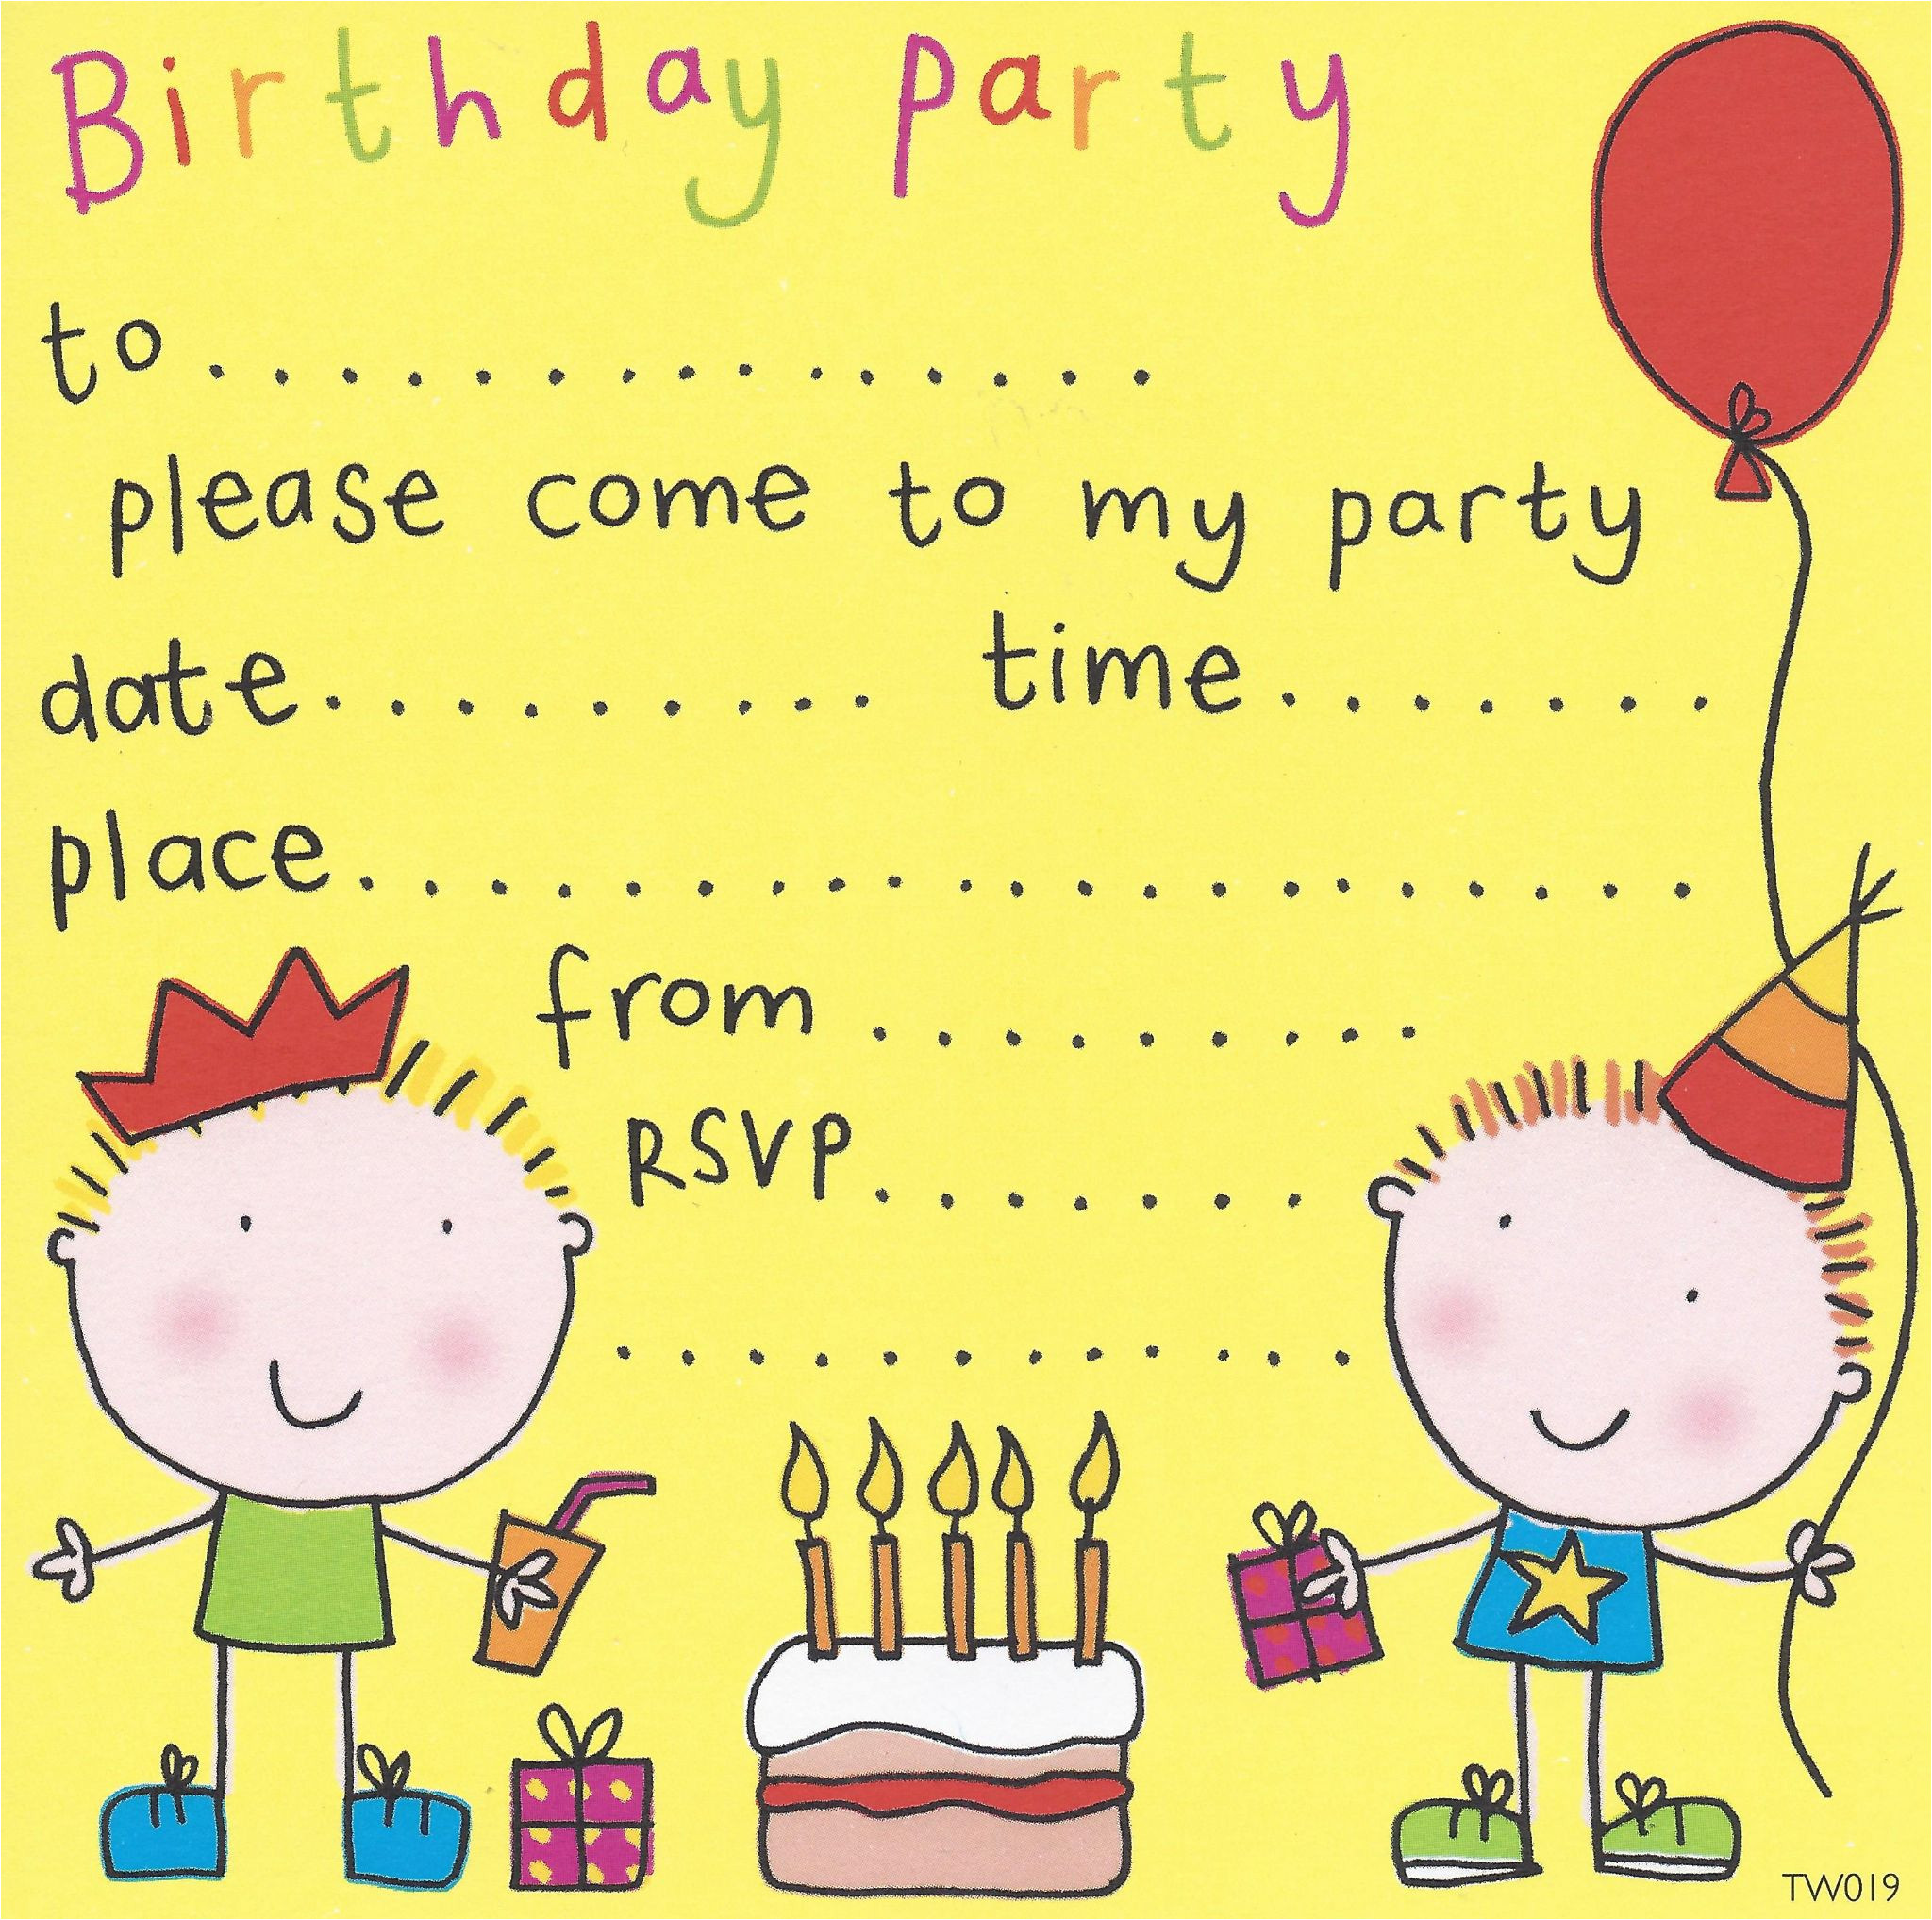 Childrens Party Invitation Template Free Birthday Party Invites for Kids Free Printable